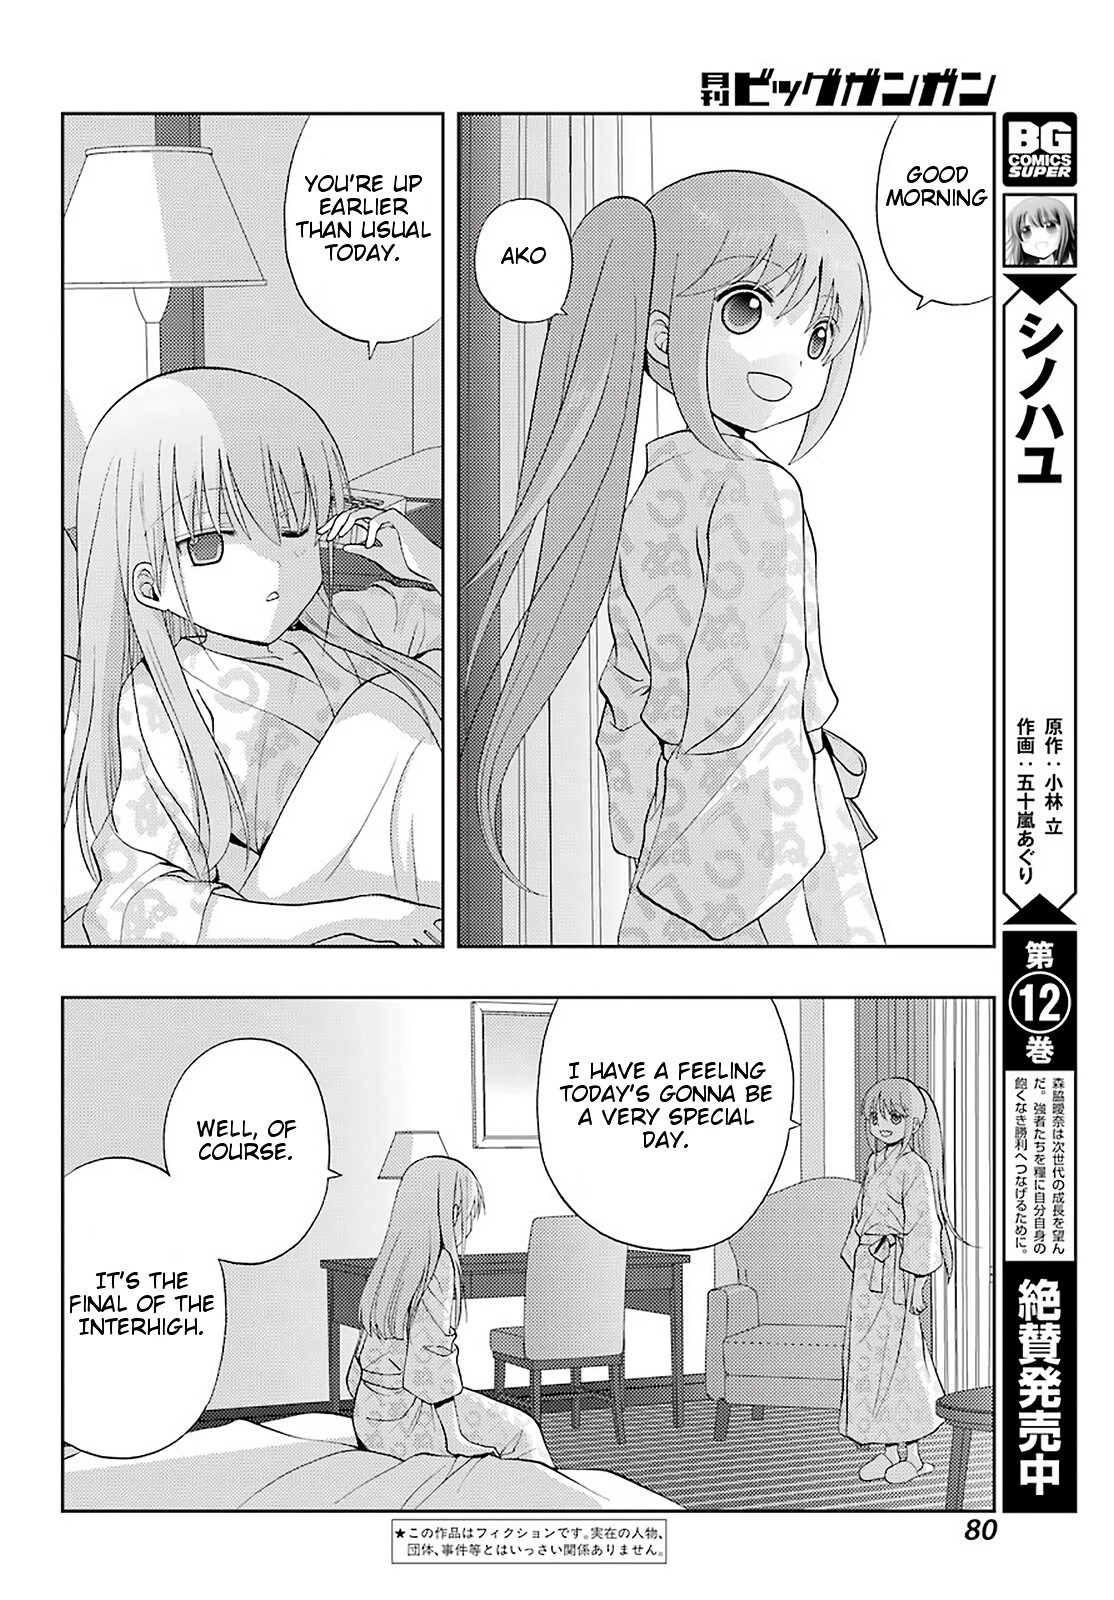 Saki: Achiga-Hen - Episode Of Side-A - New Series Chapter 22: Entrance - Picture 3